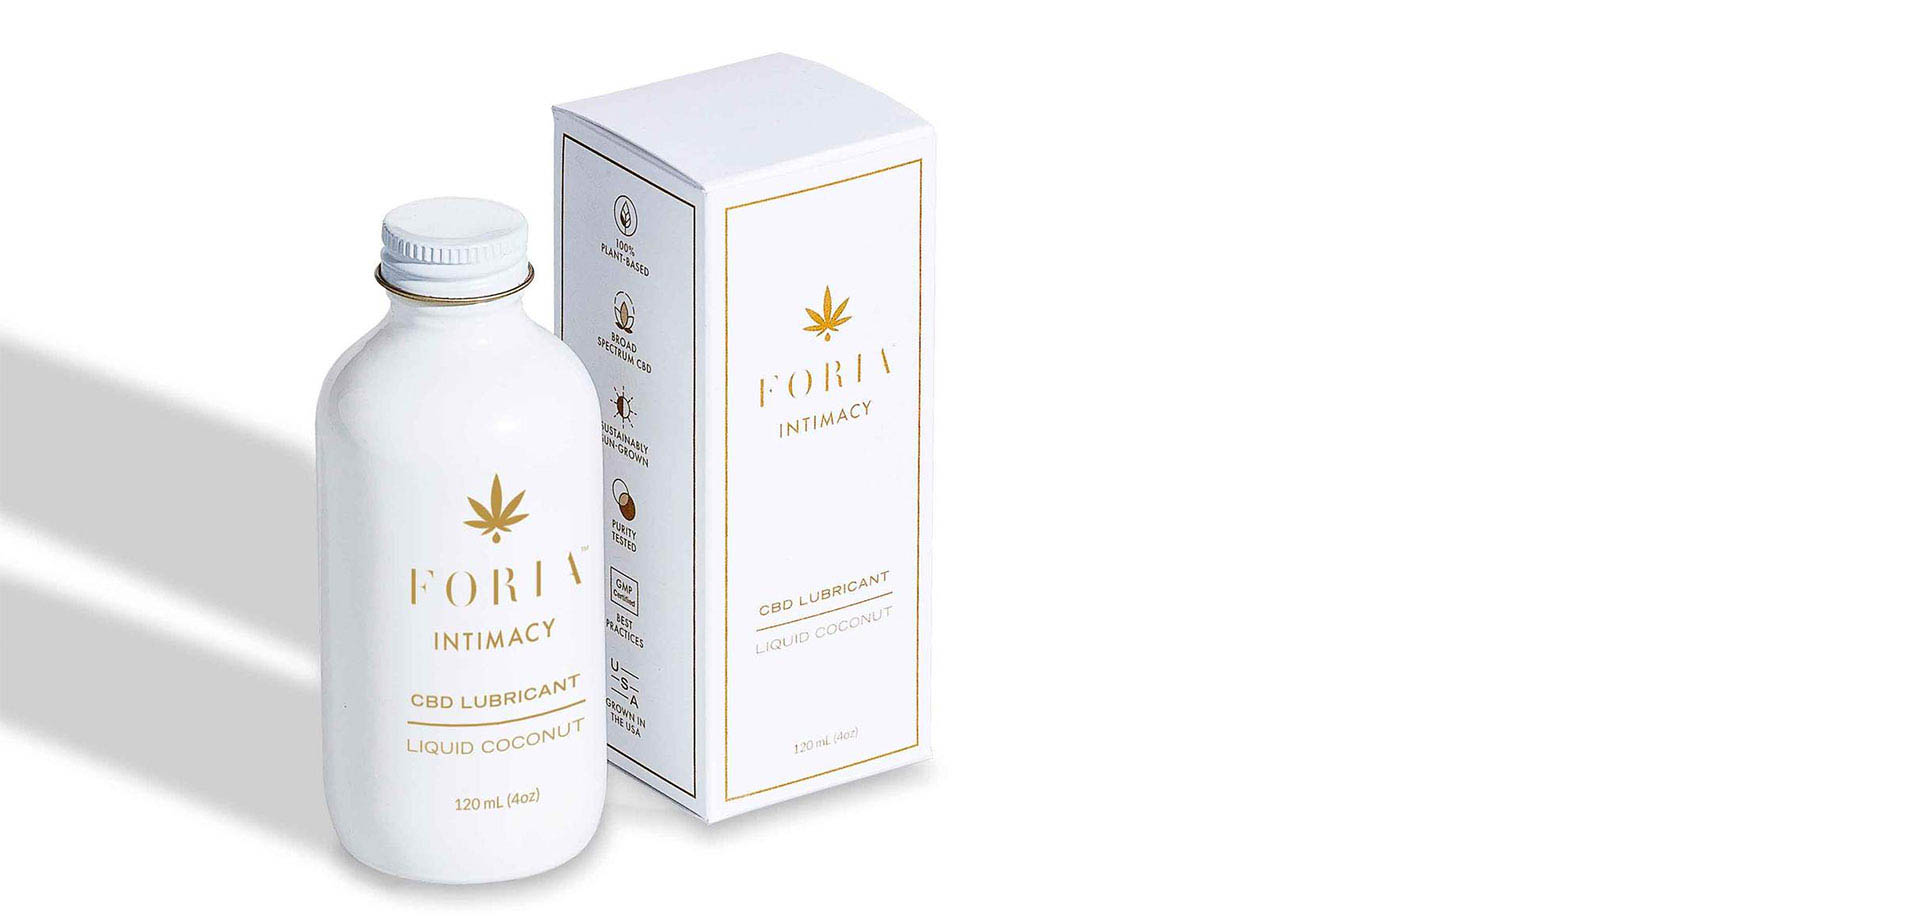 Natural oil-based CBD lubricant.